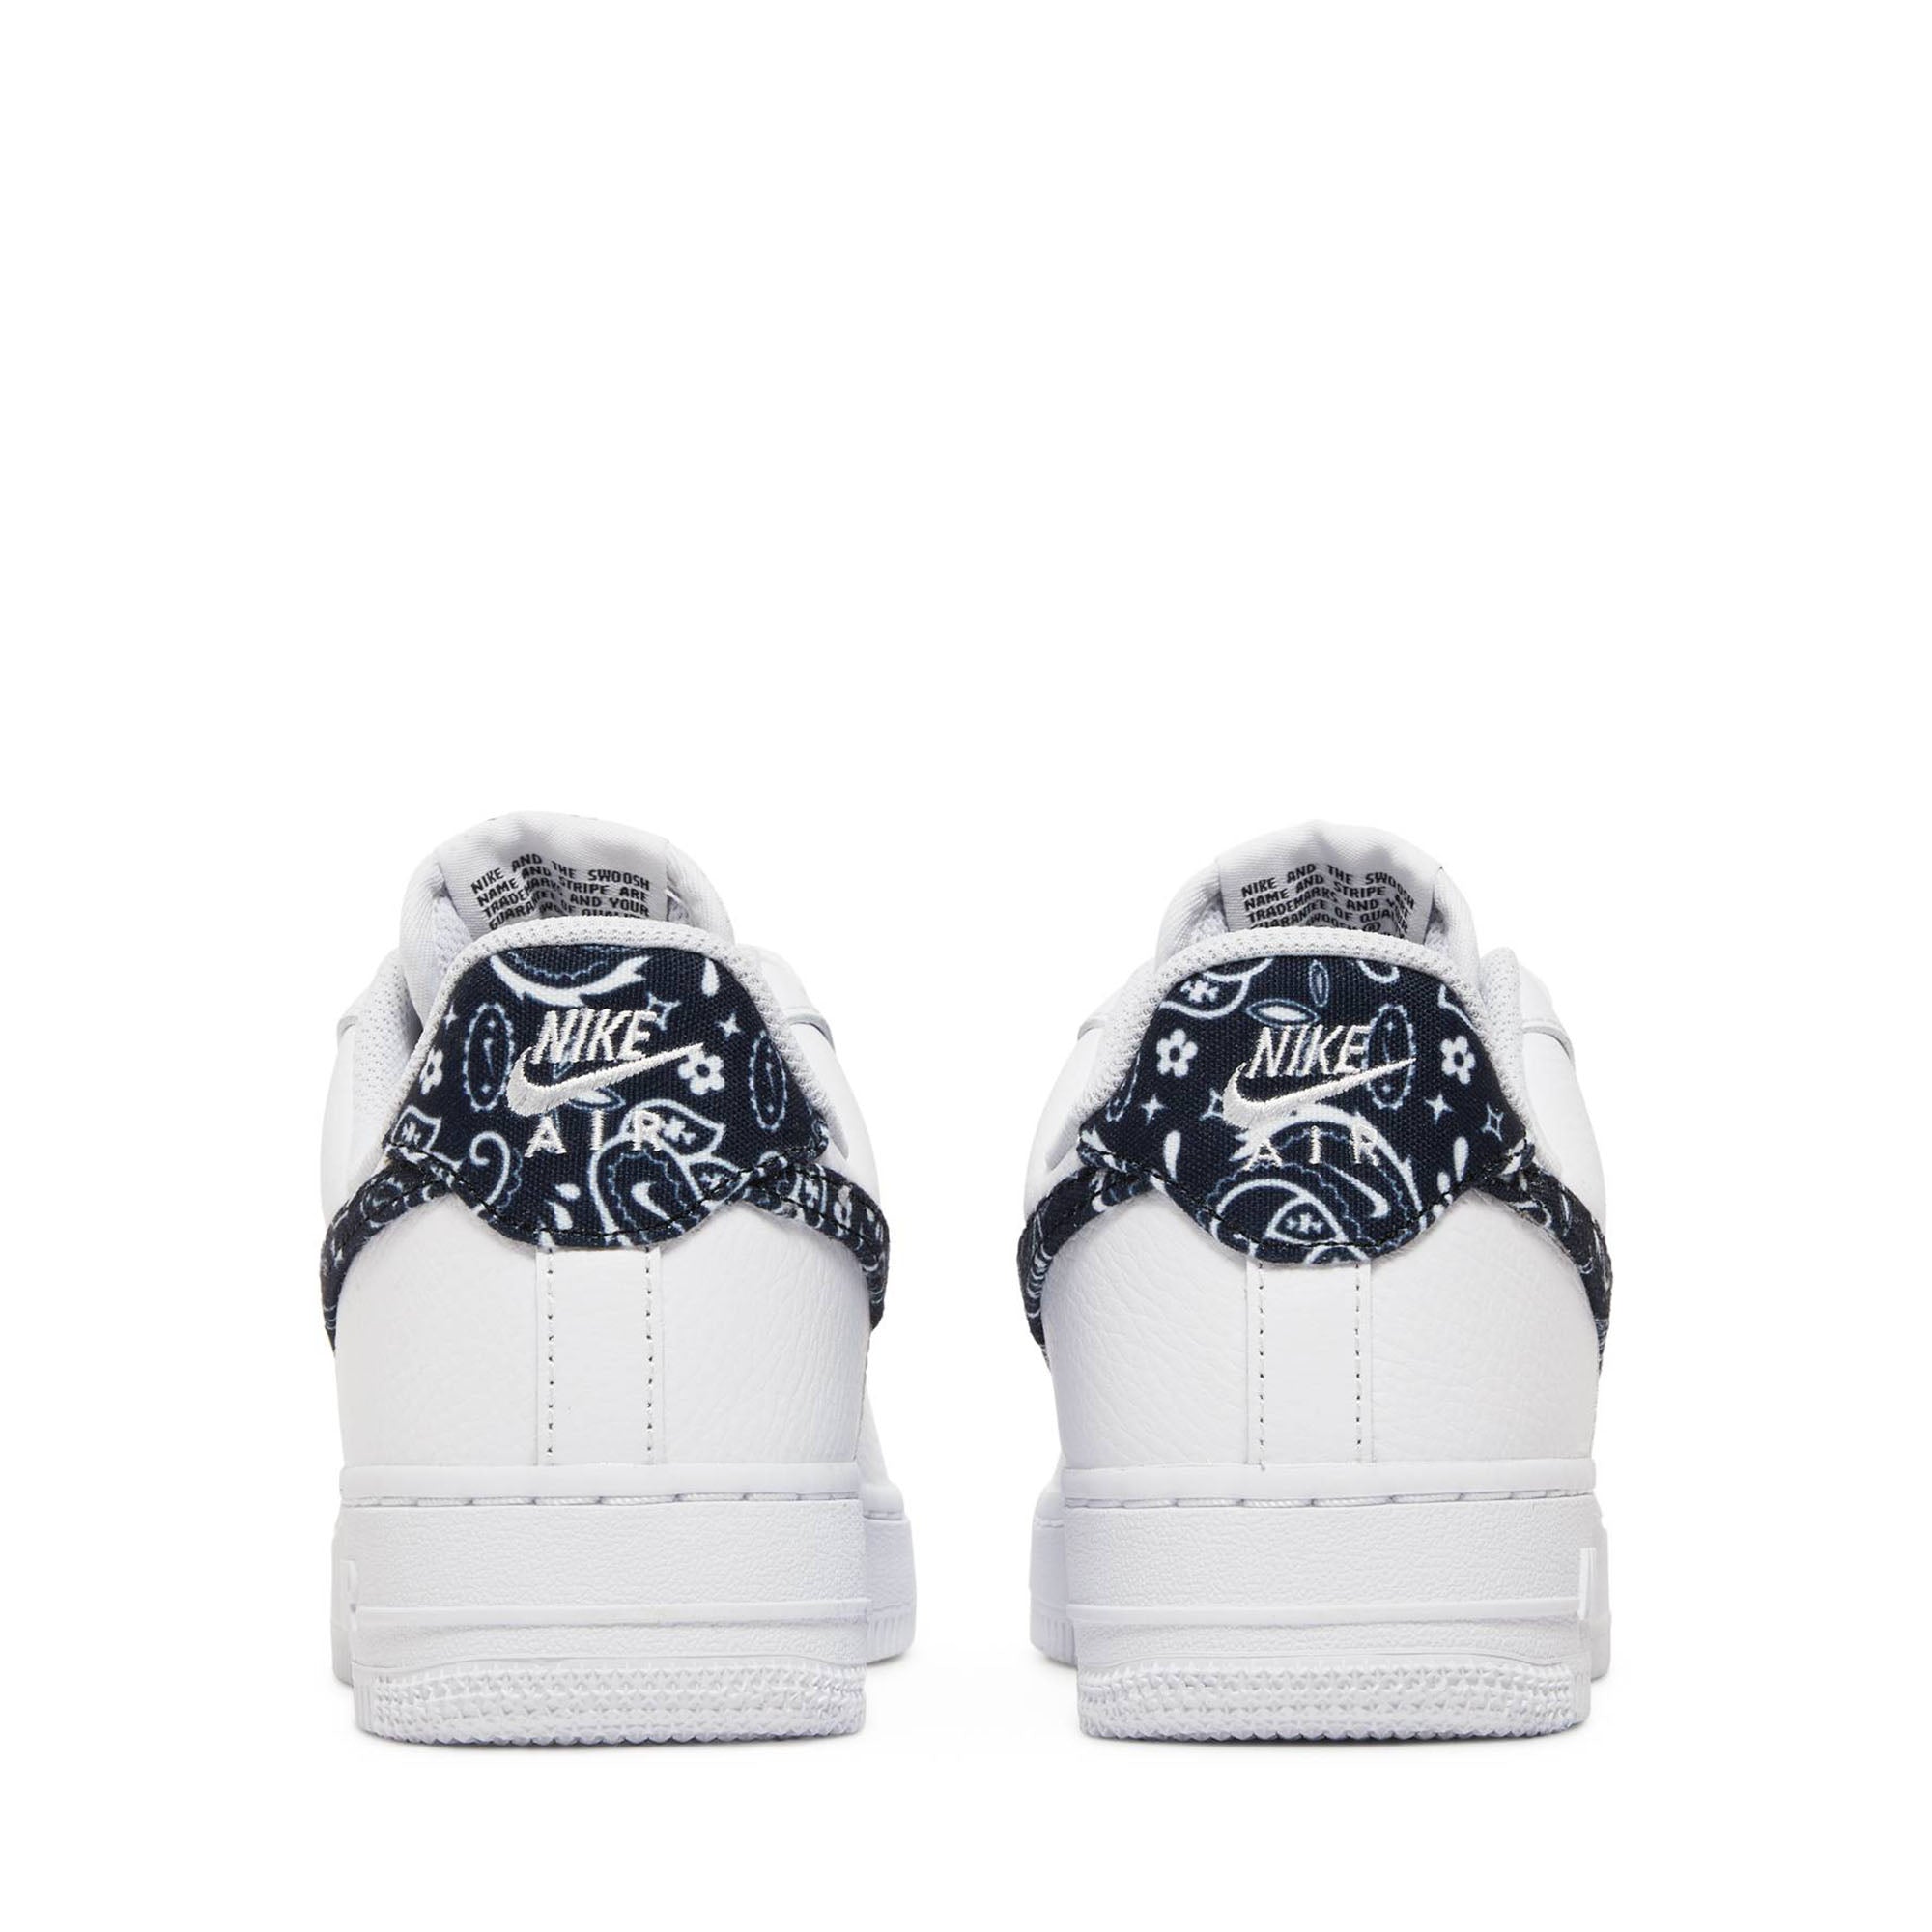 Nike Air Force 1 Low '07 Essential White Black Paisley - DH4406-101 – Izicop